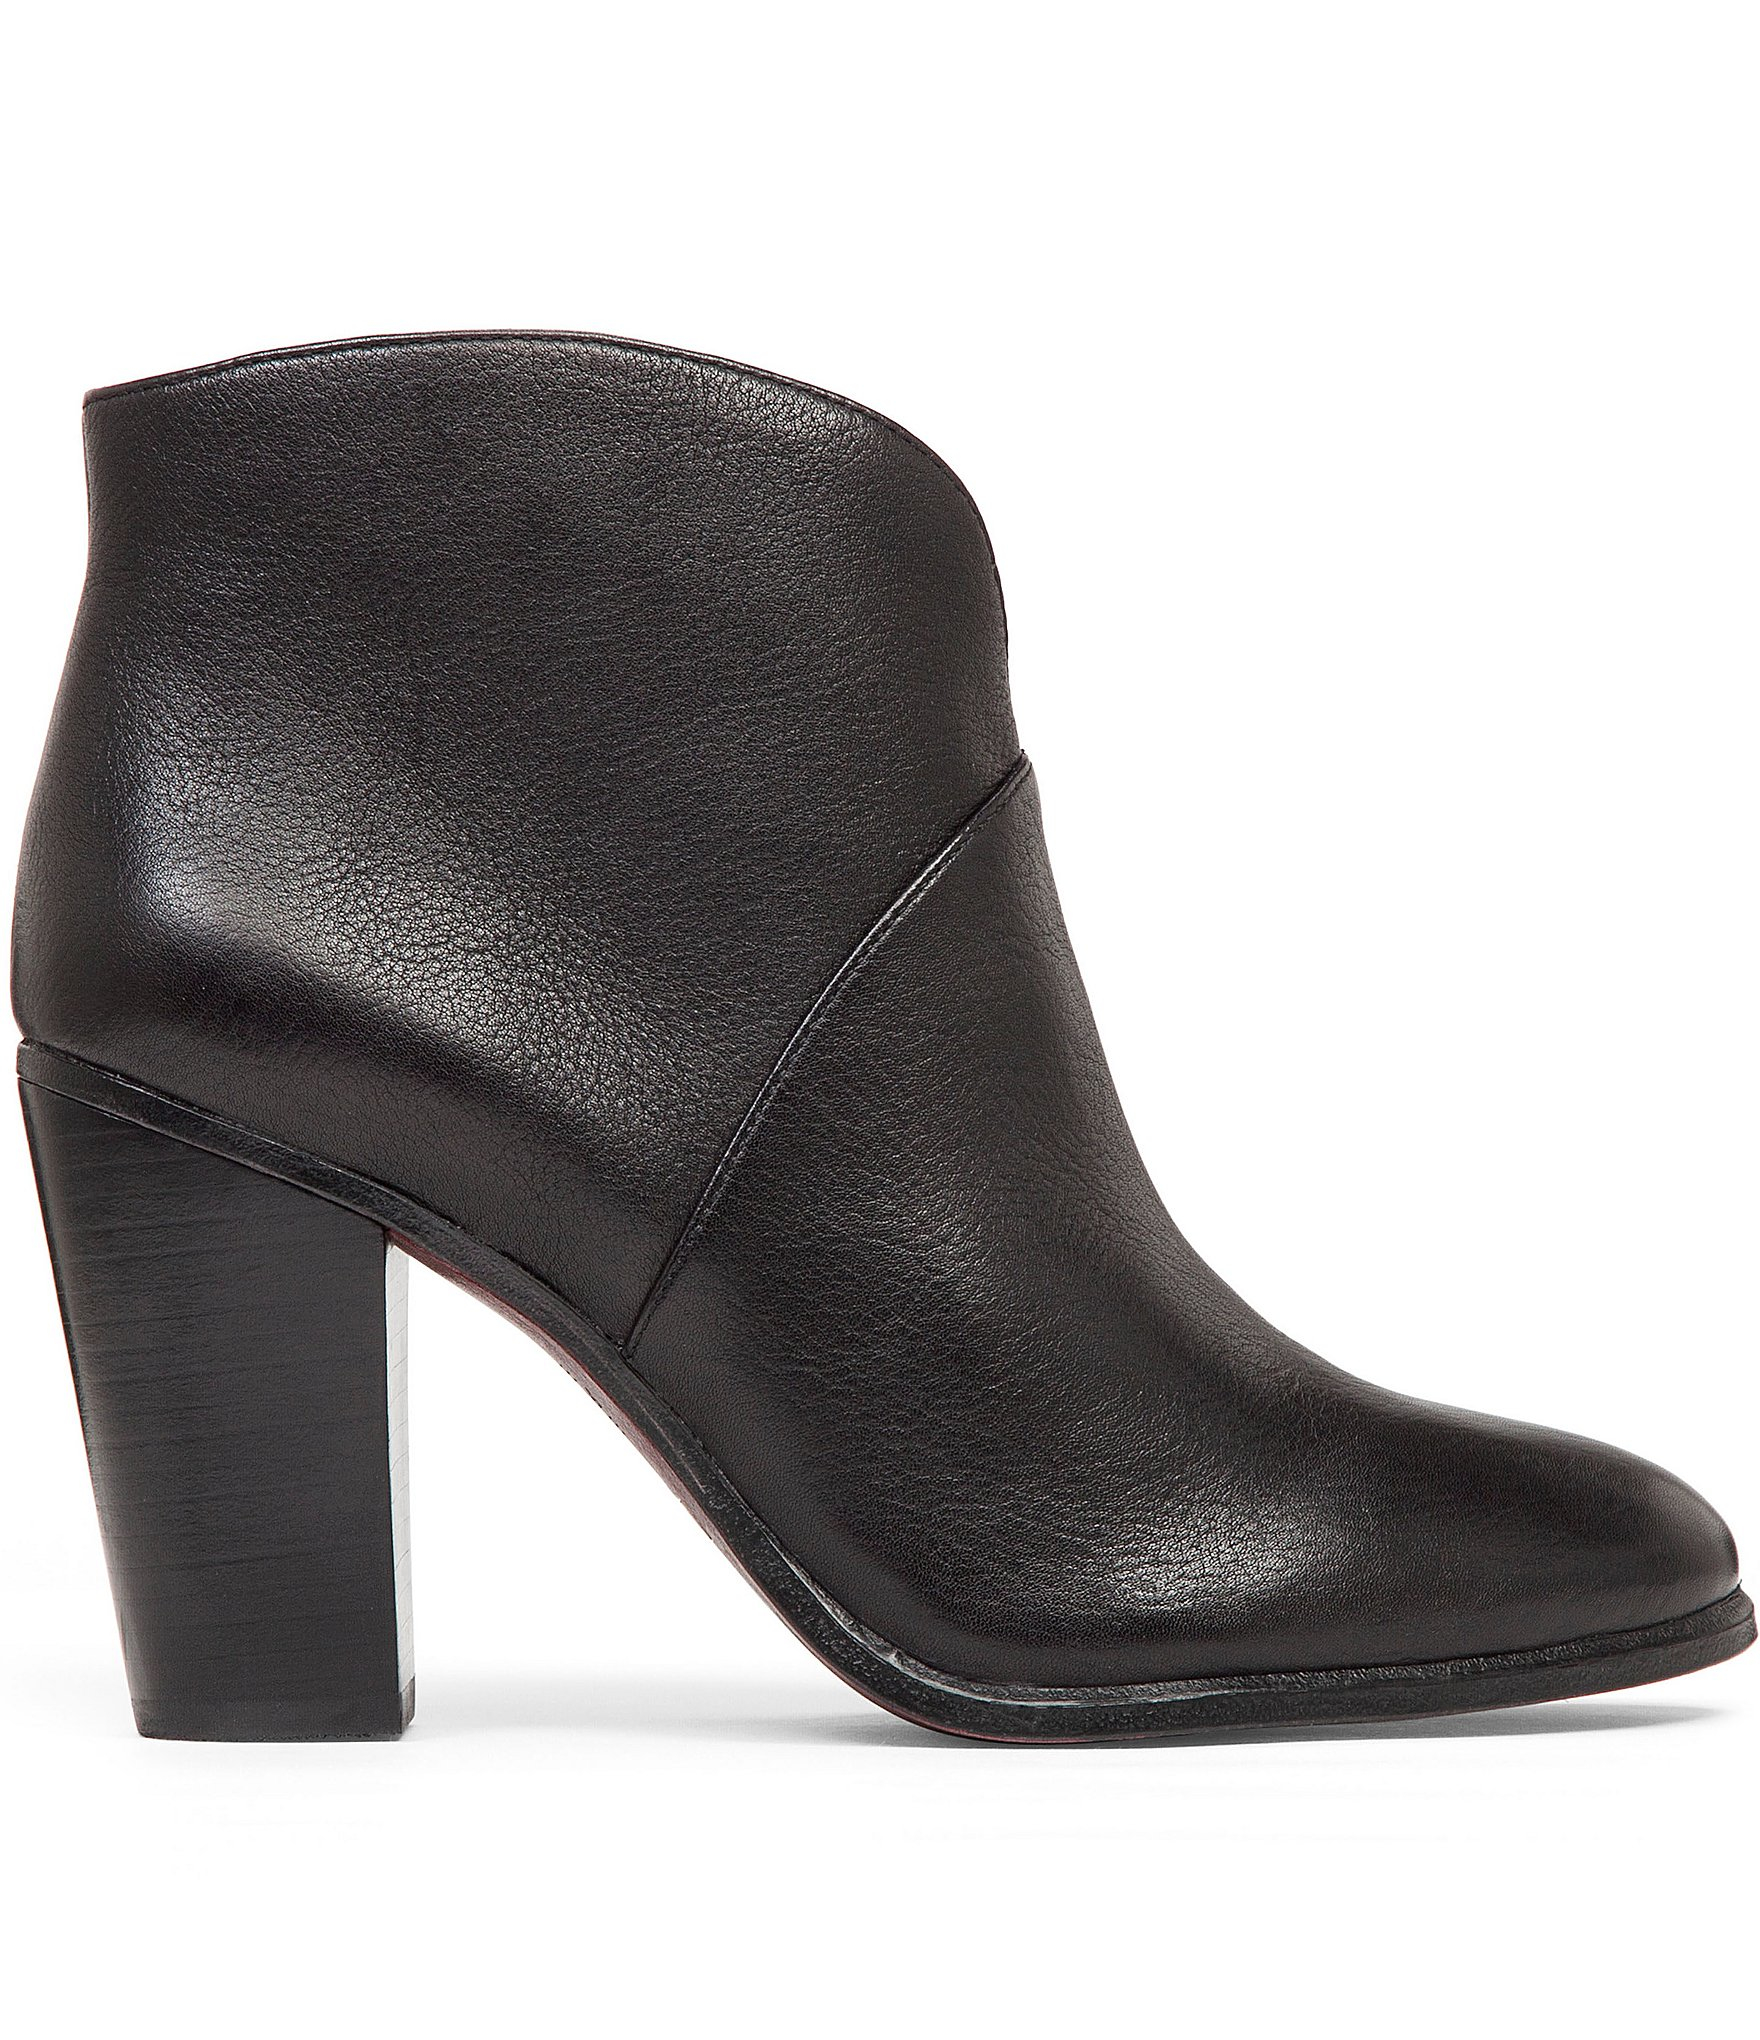 Lyst - Vince camuto Franell Embossed Booties